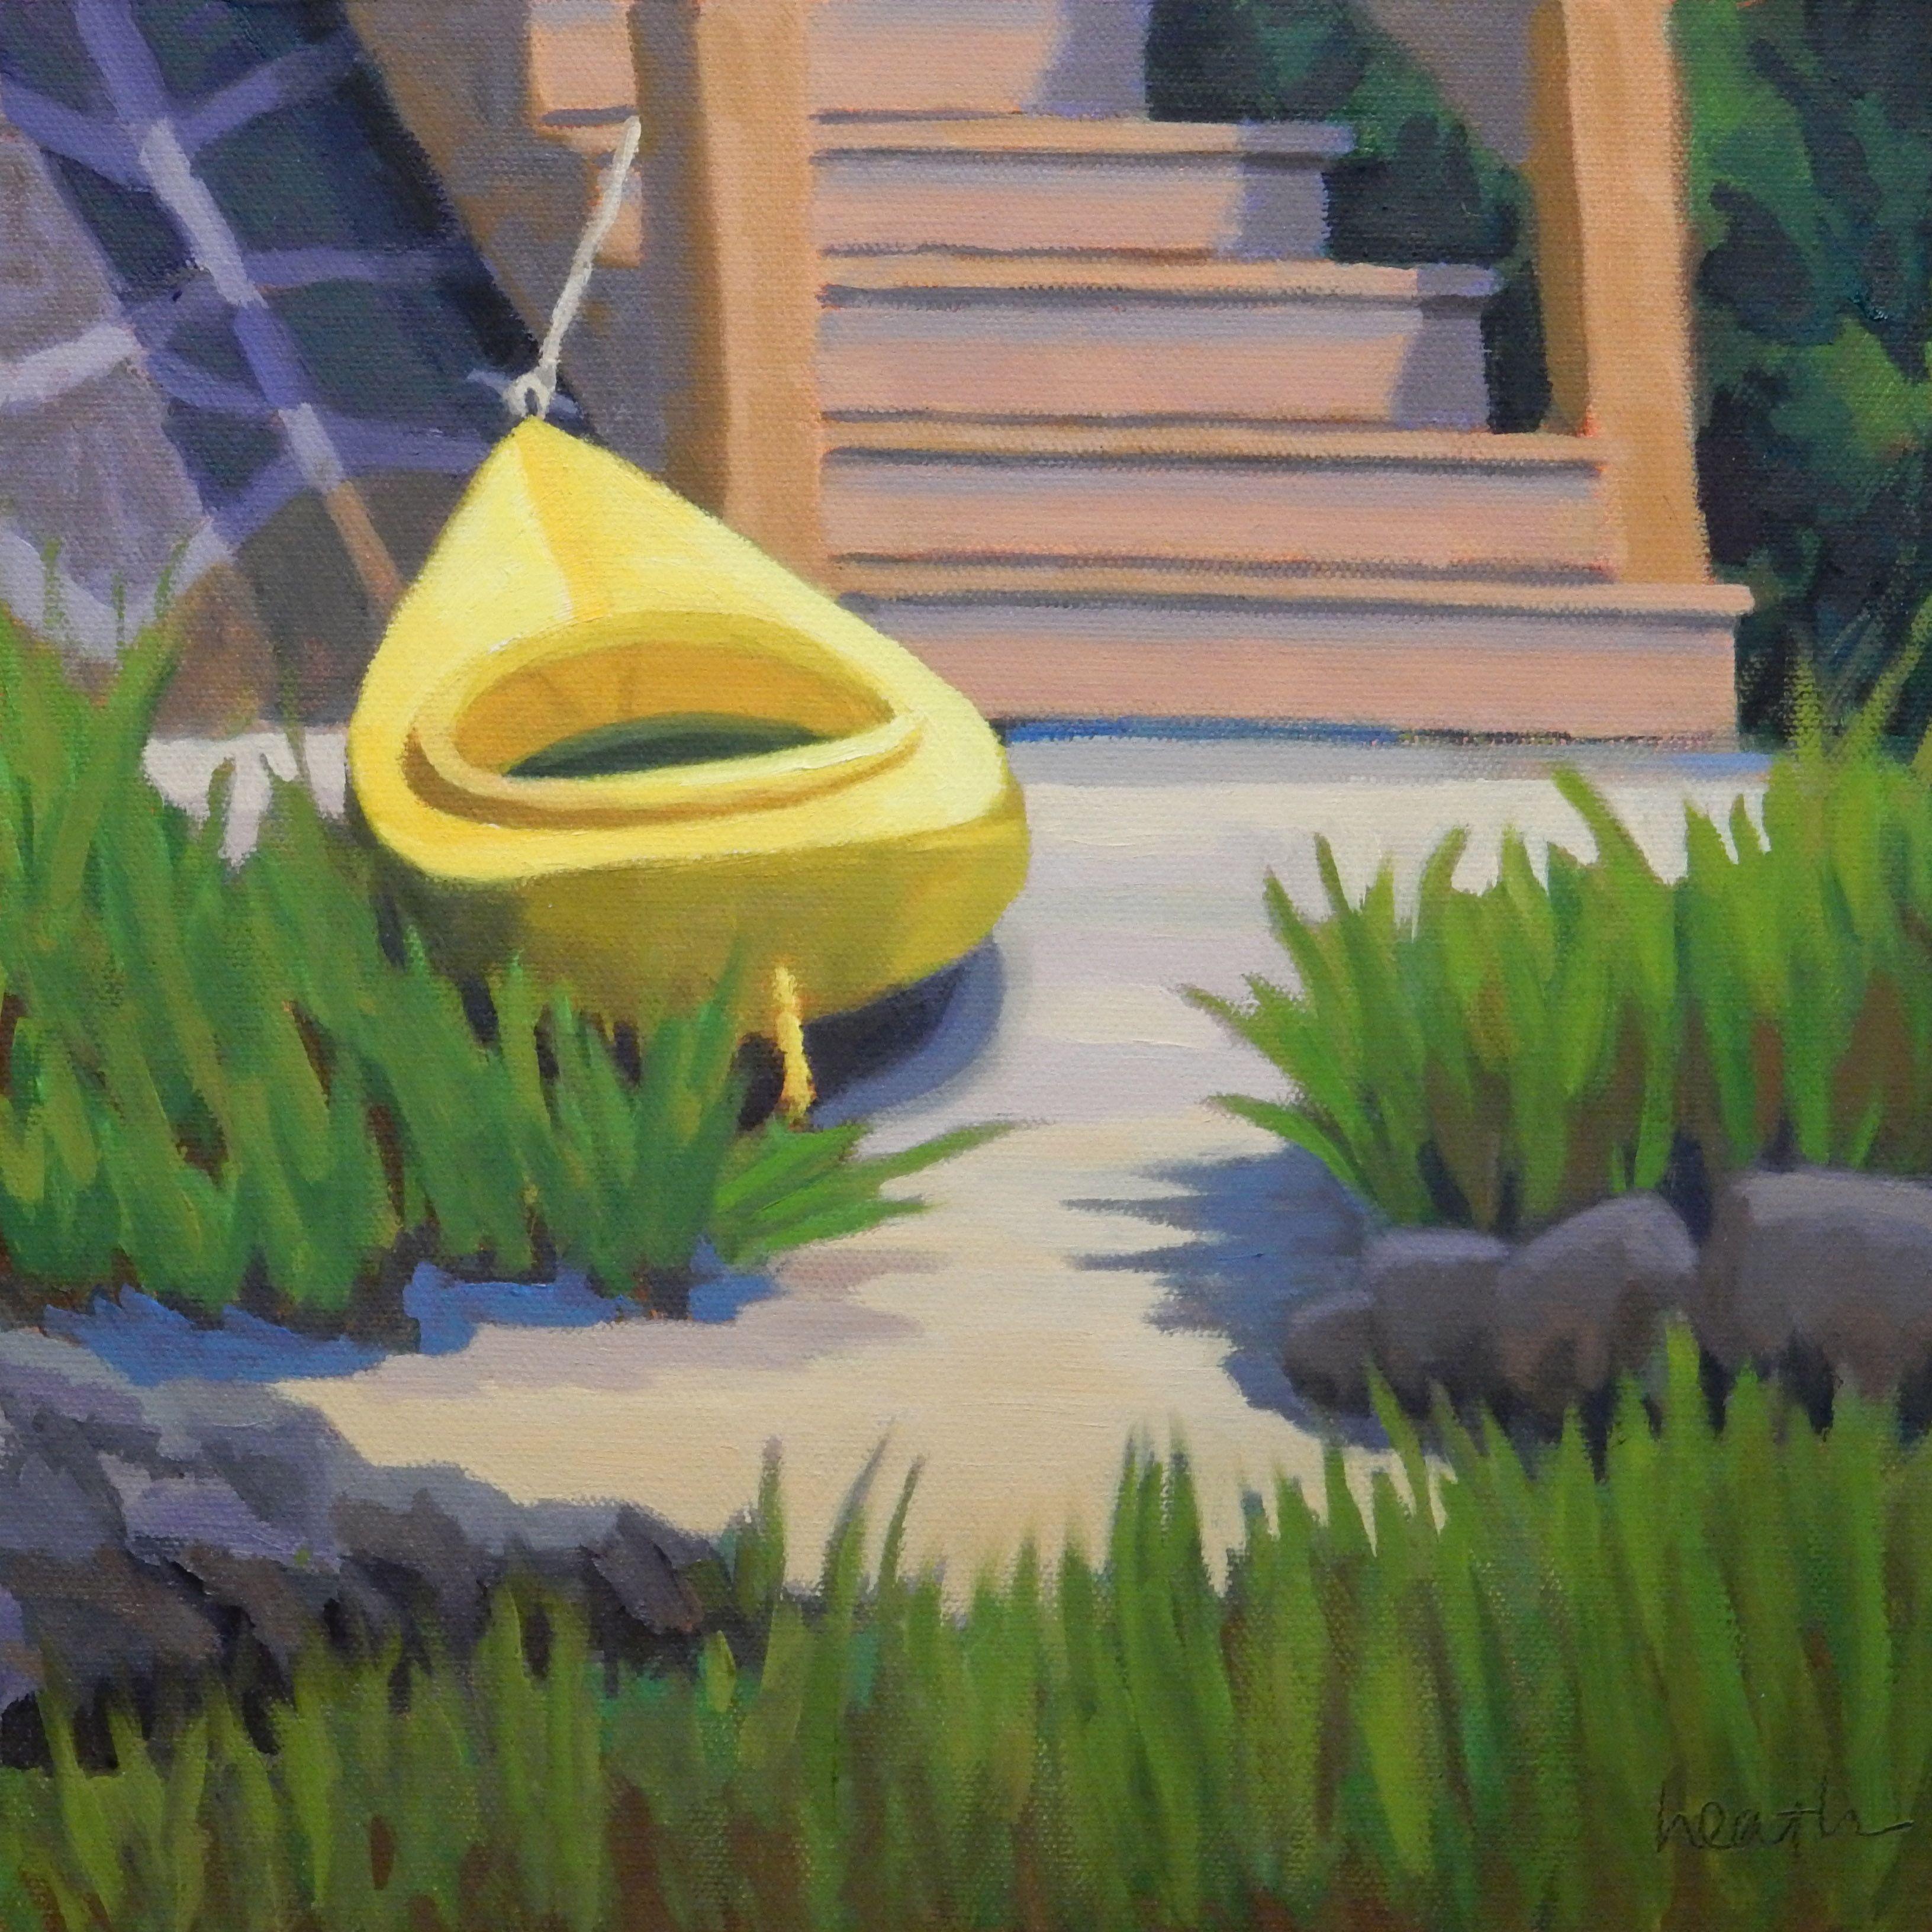 This colorful painting promises adventure in a yellow kayak. :: Painting :: Contemporary :: This piece comes with an official certificate of authenticity signed by the artist :: Ready to Hang: No :: Signed: Yes :: Signature Location: bottom right ::